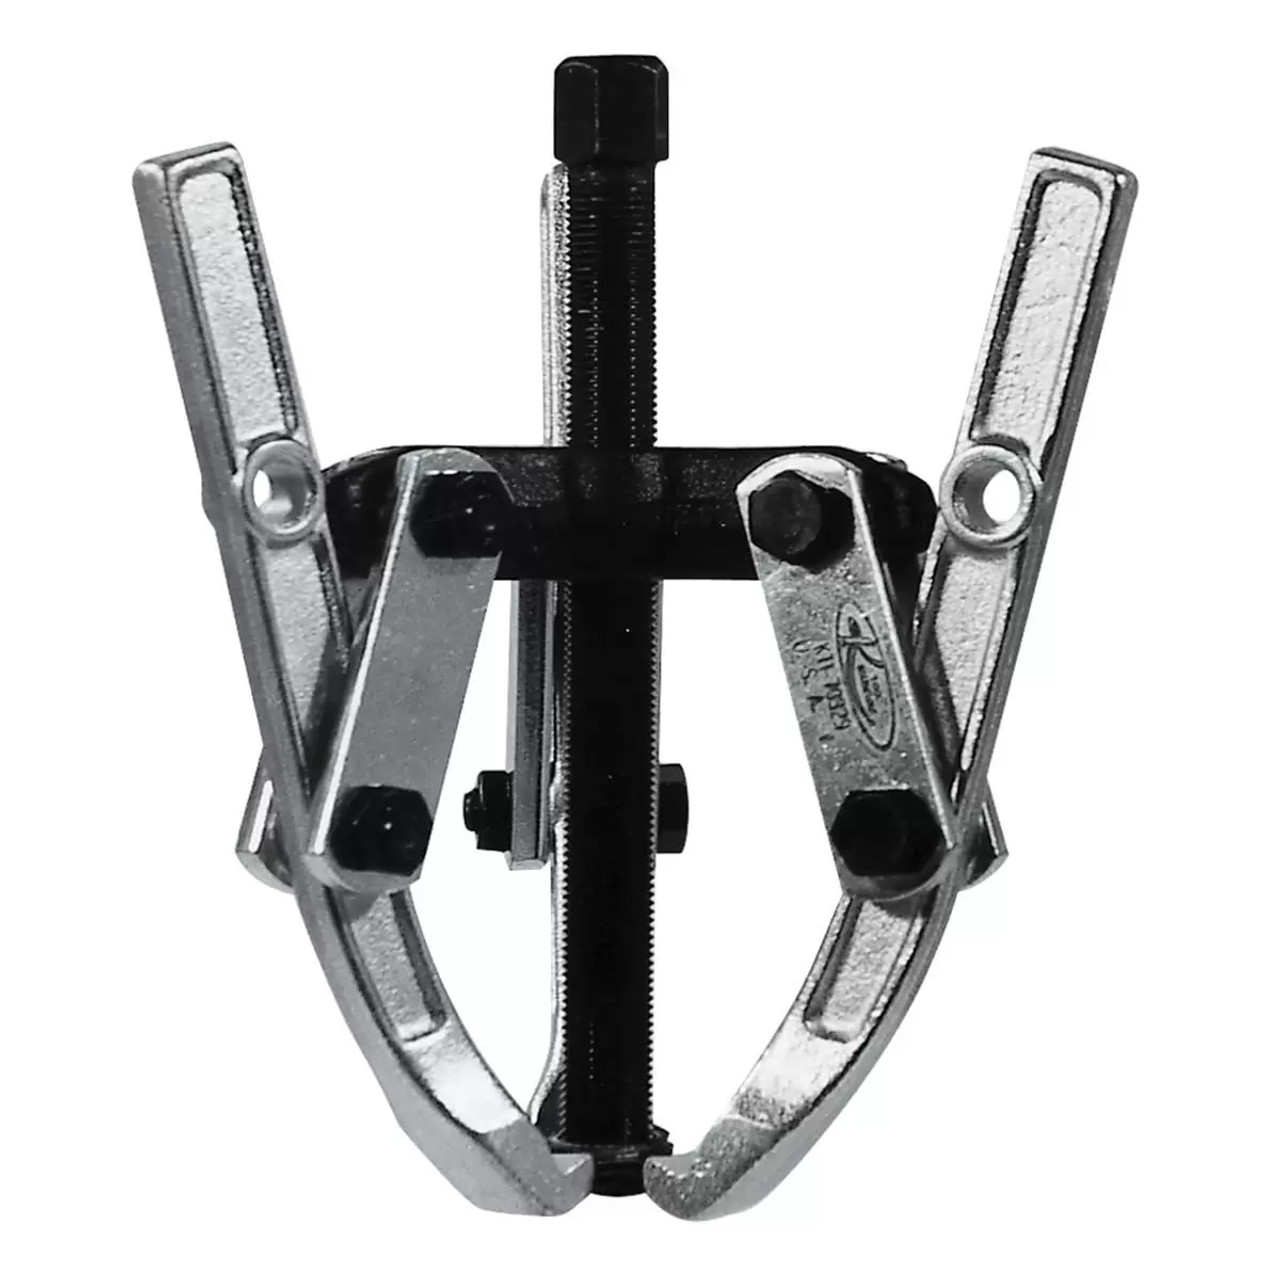 8" Adjustable Puller, 5-Ton, 3 Jaw